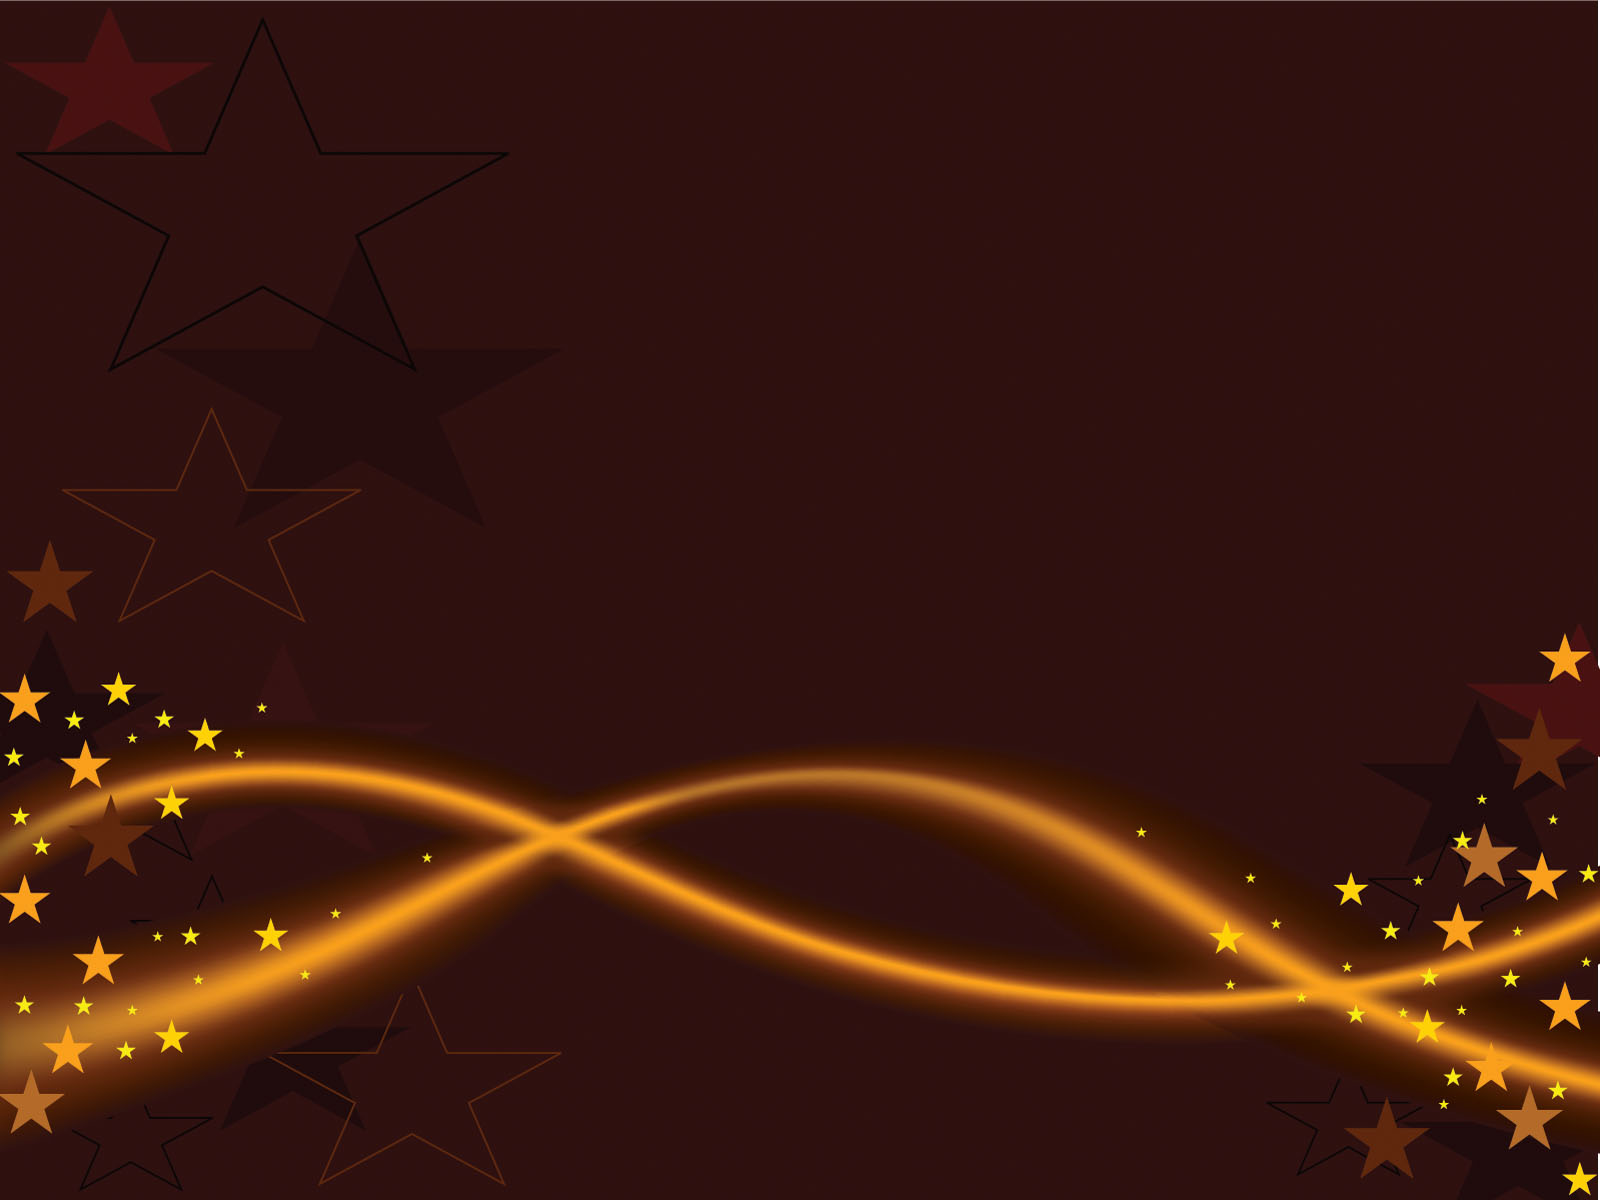 Golden Lines with Stars Powerpoint Templates - Abstract, Black, Brown,  Orange - Free PPT Backgrounds and Templates